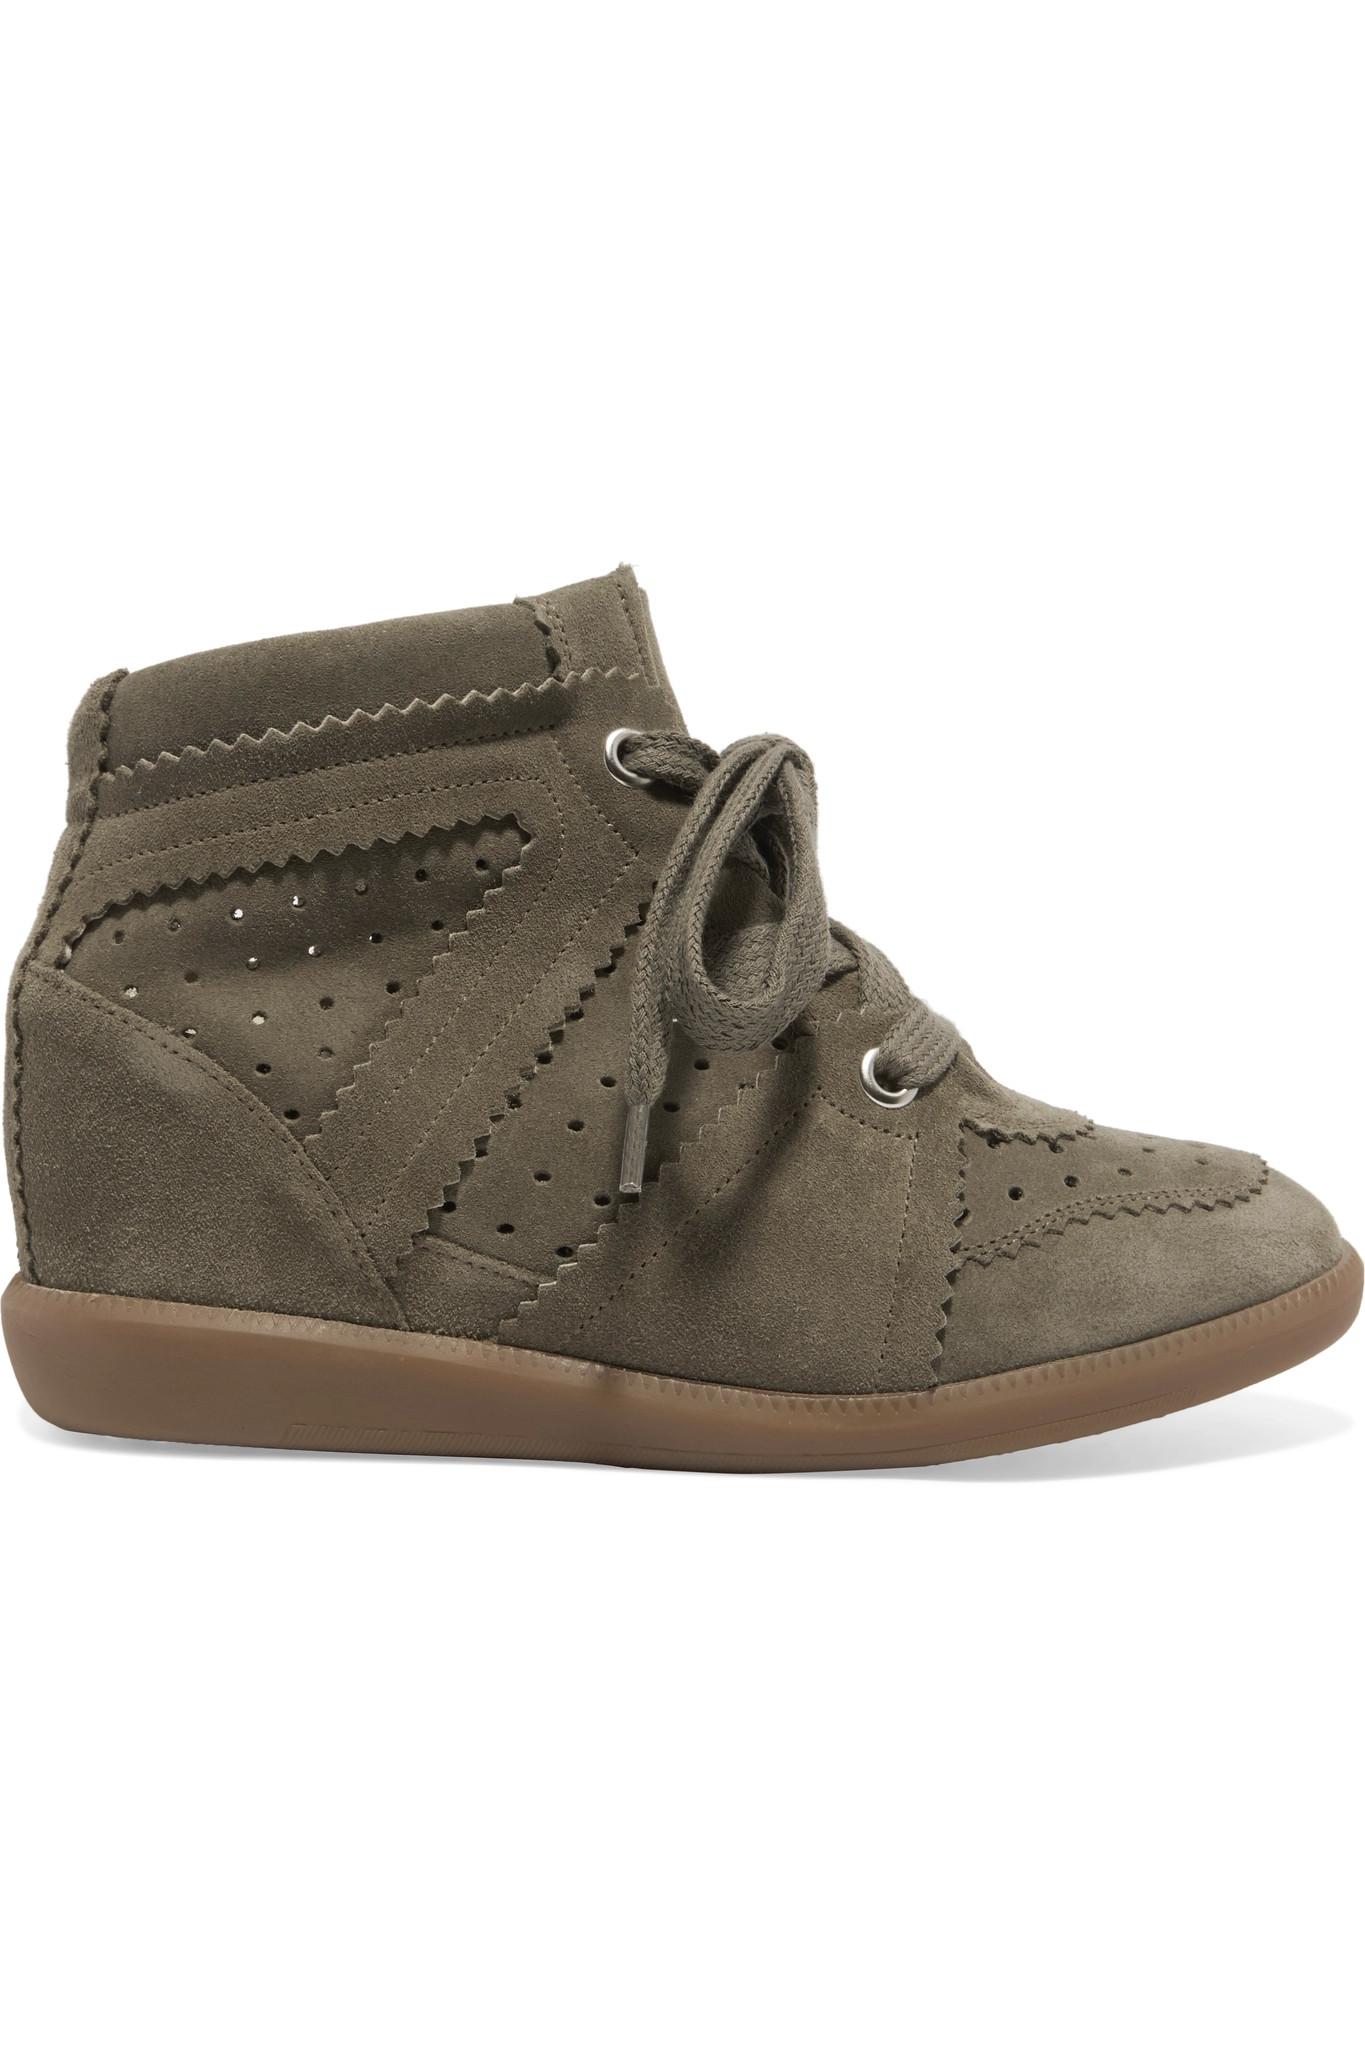 Lyst - Isabel Marant Étoile Bobby Suede Wedge Sneakers in Green